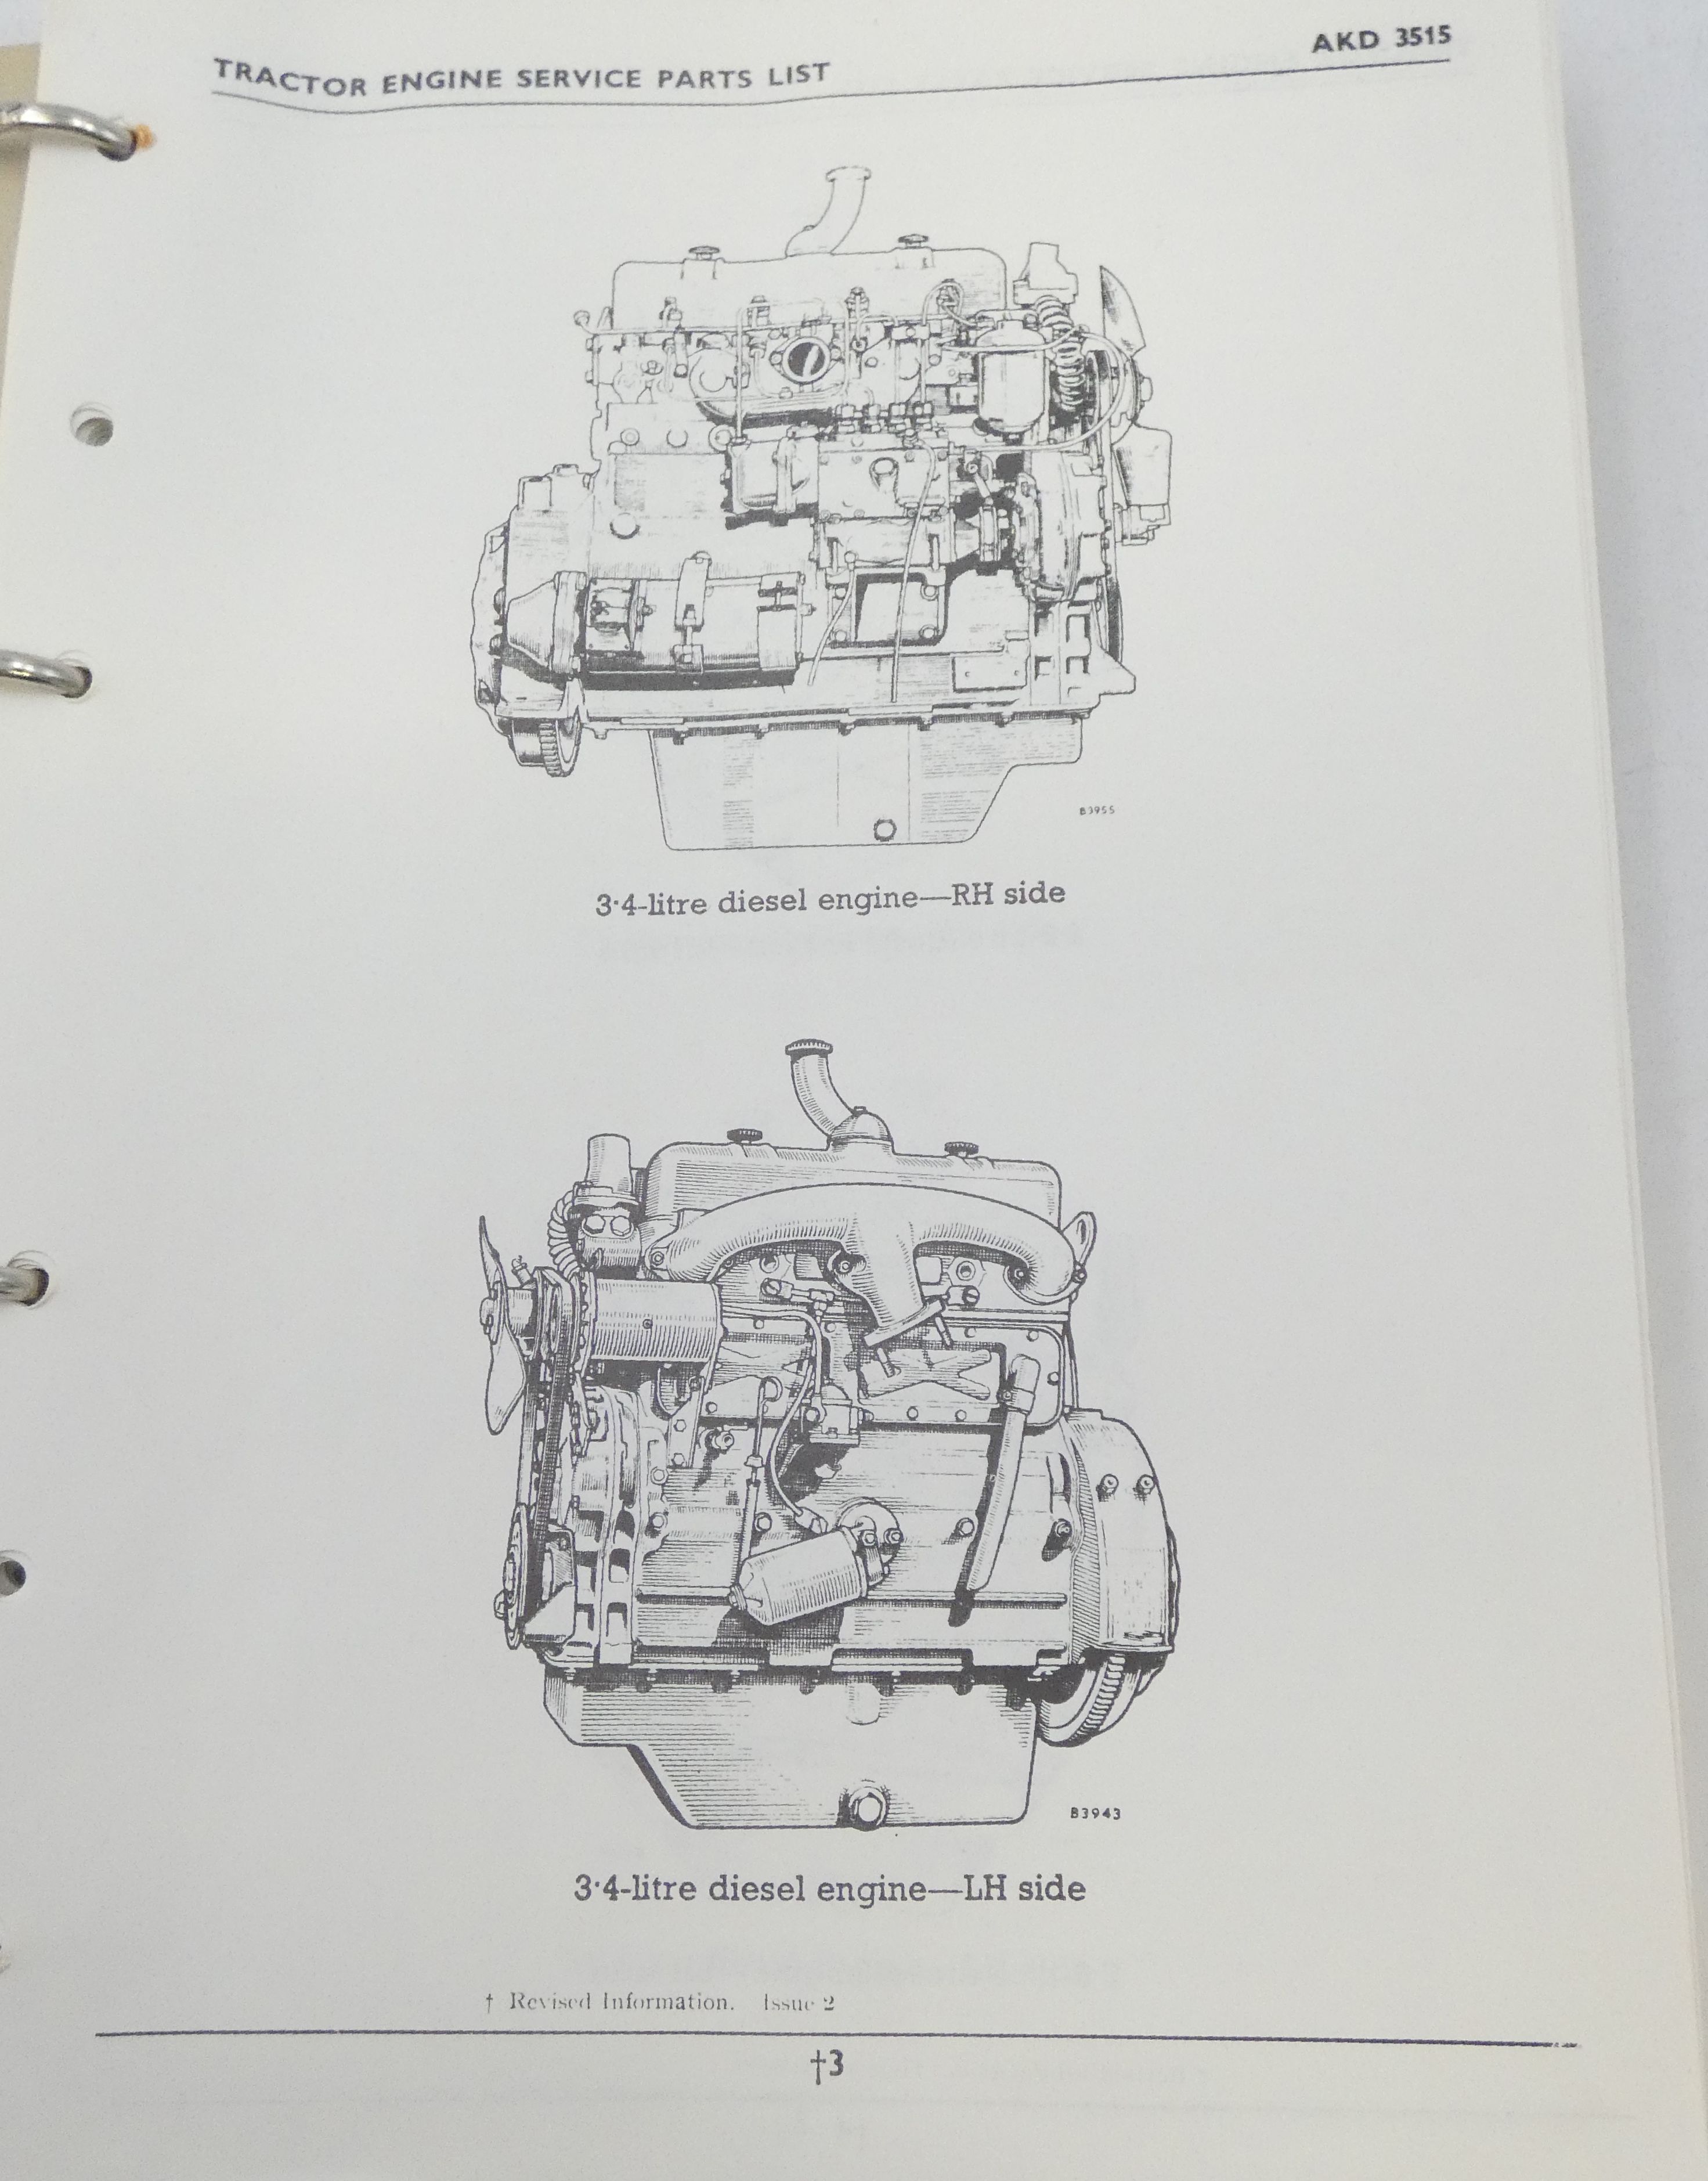 Leyland BMC tractor engines diesel petrol and V.O. service parts list